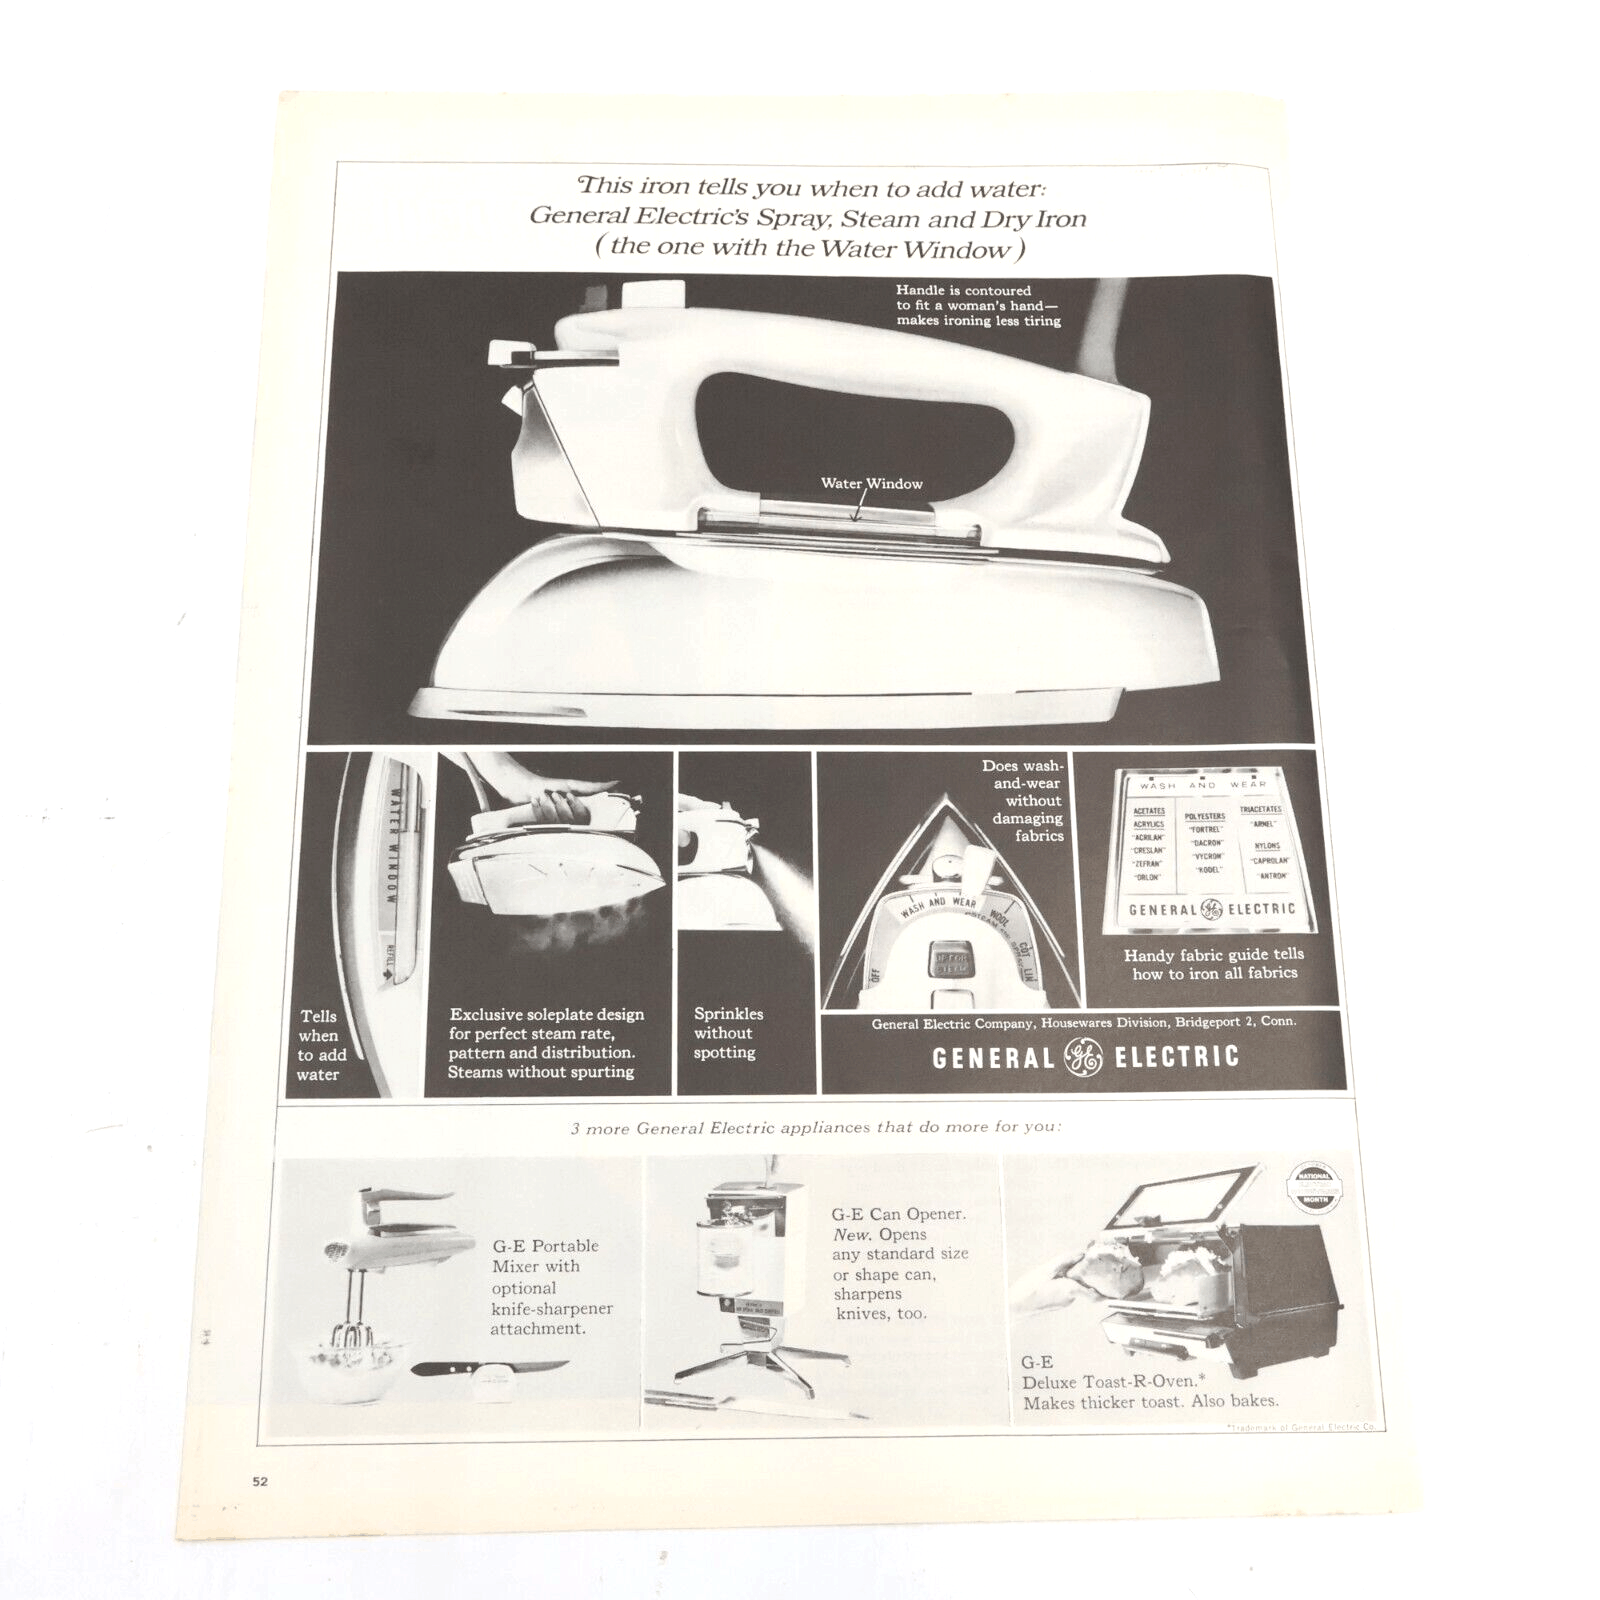 1964 General Electric Spray Steam Dry Iron Home Appliances Print Ad 10.5×13.5